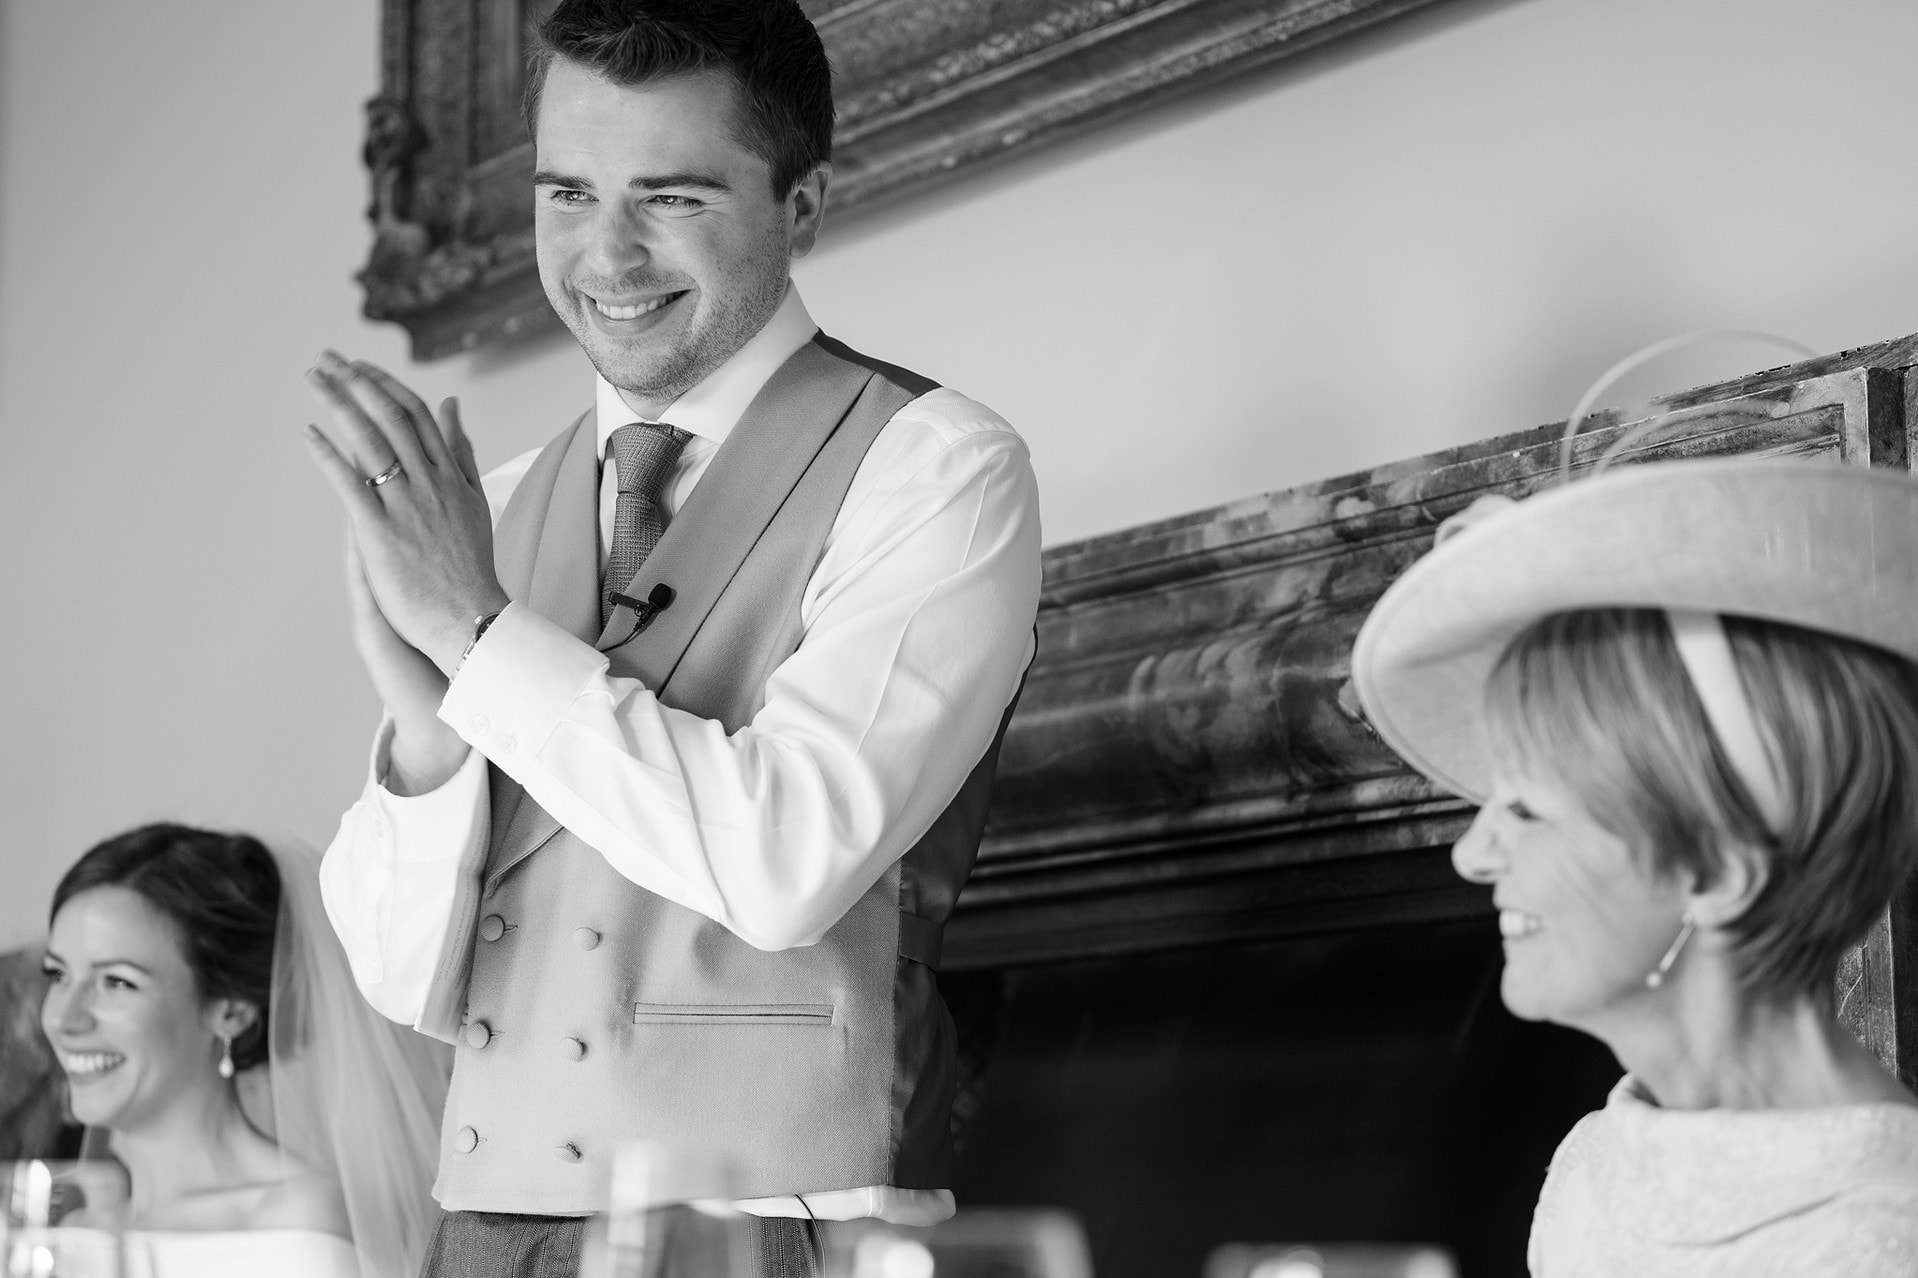 The groom clapping to thank someone during his speech